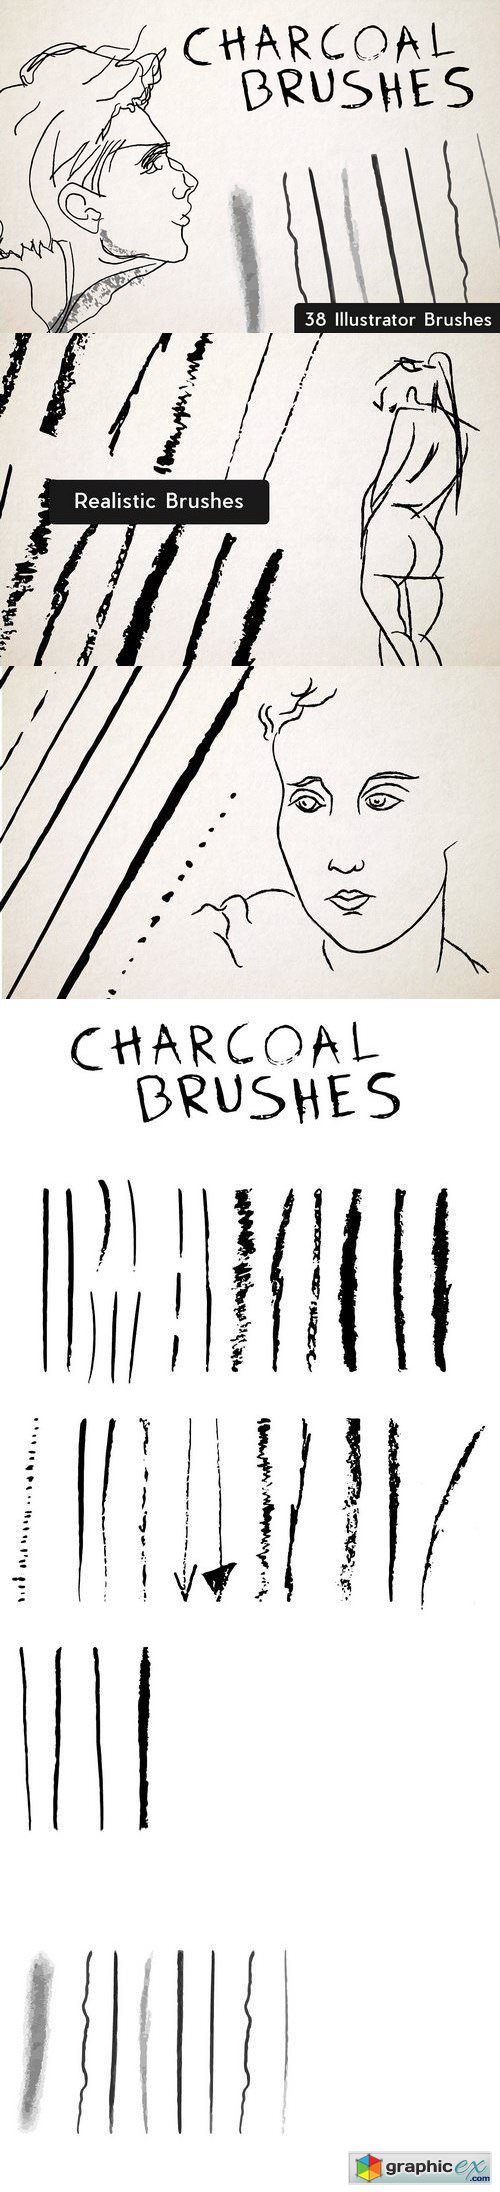 Set of 38 Charcoal Brushes